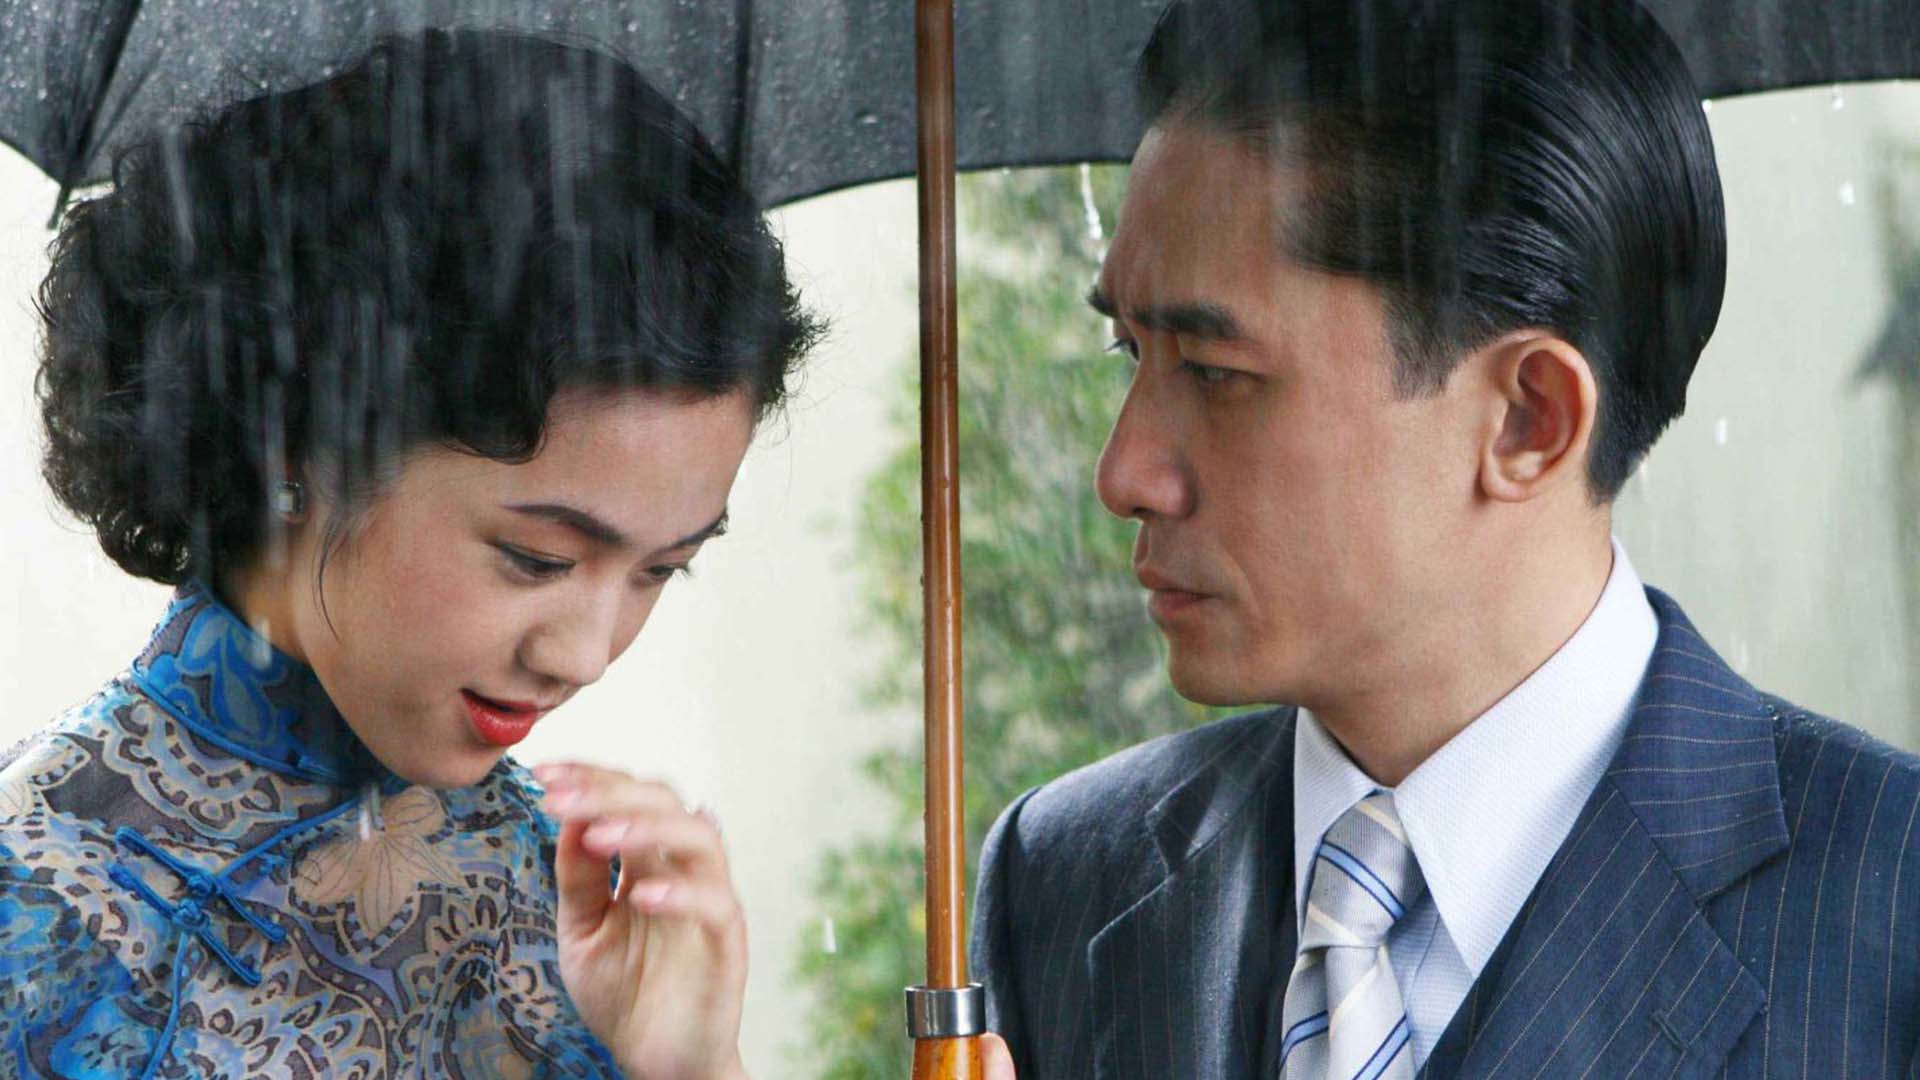 Tony Liang and Joan Chen under the rain and umbrella in Lost, Caution